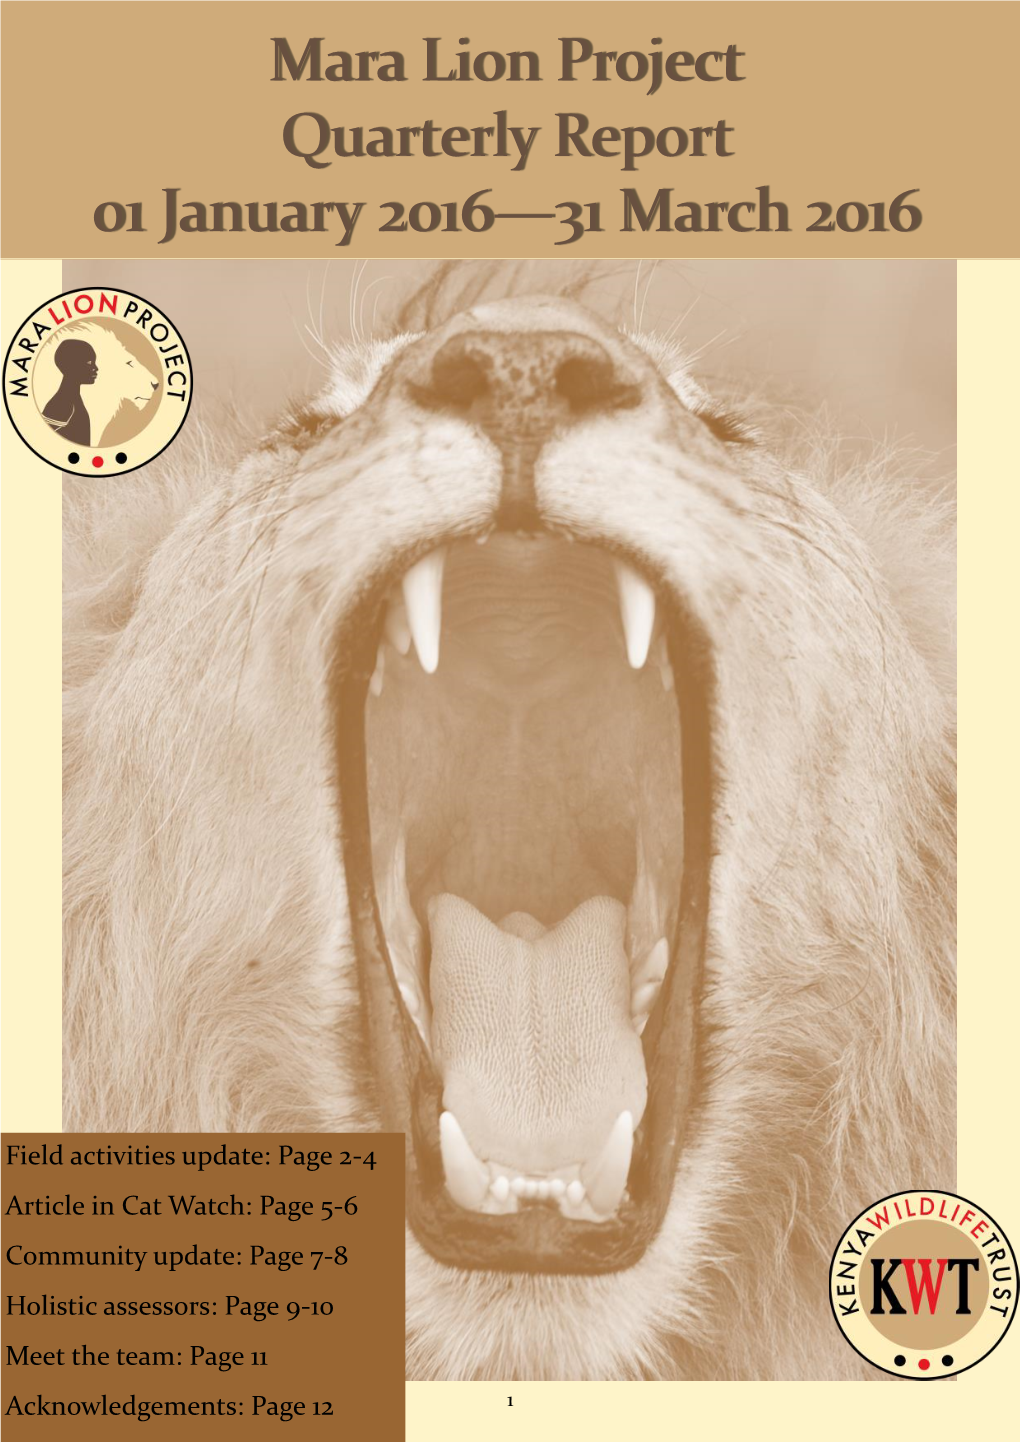 Mara Lion Project Quarterly Report 01 January 2016—31 March 2016